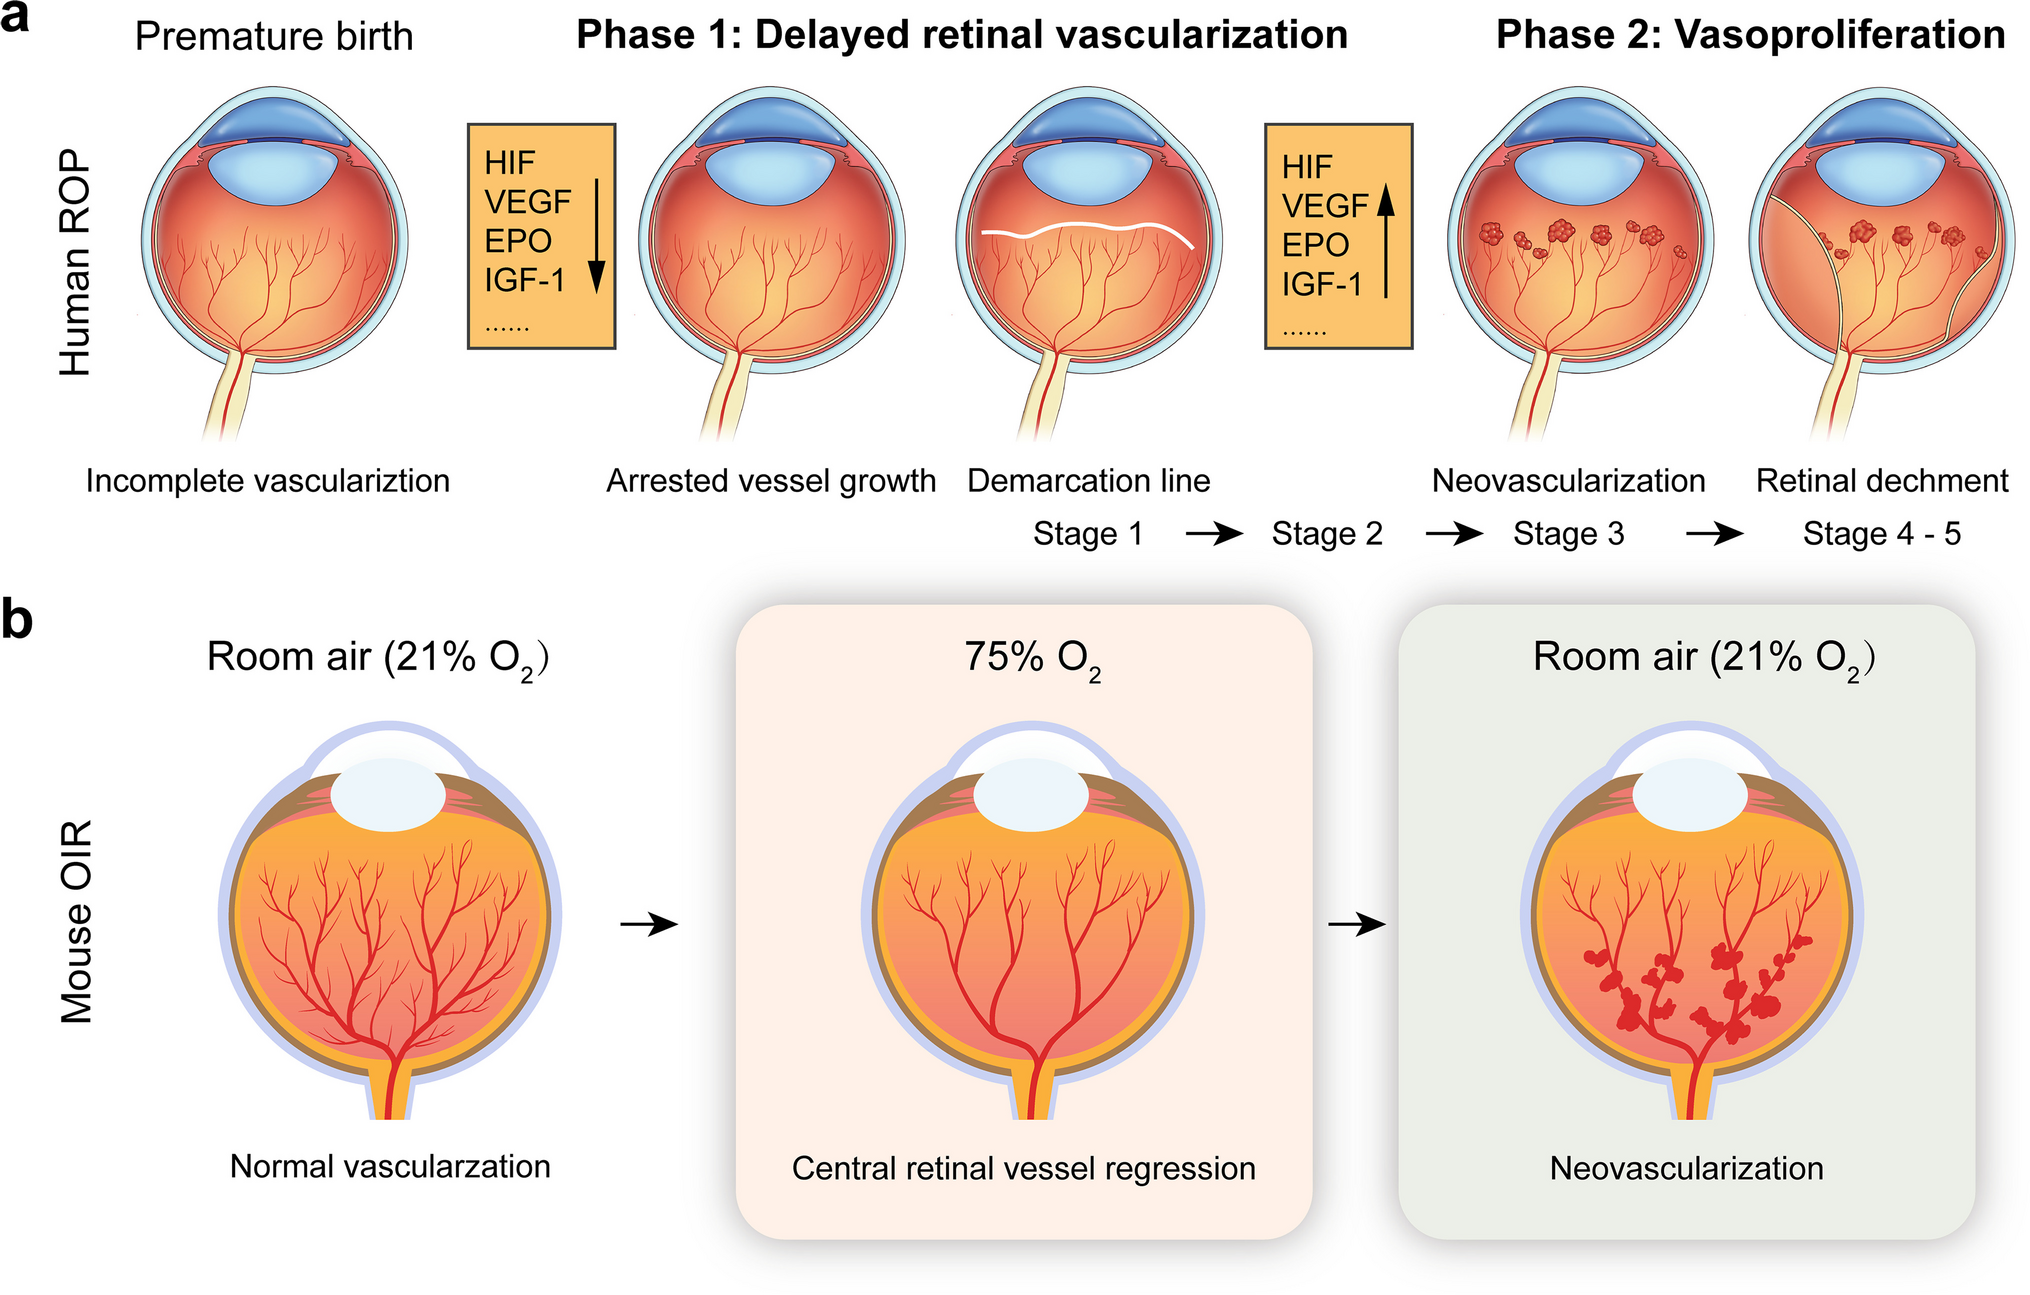 Targeting adenosine A2A receptors for early intervention of retinopathy of prematurity